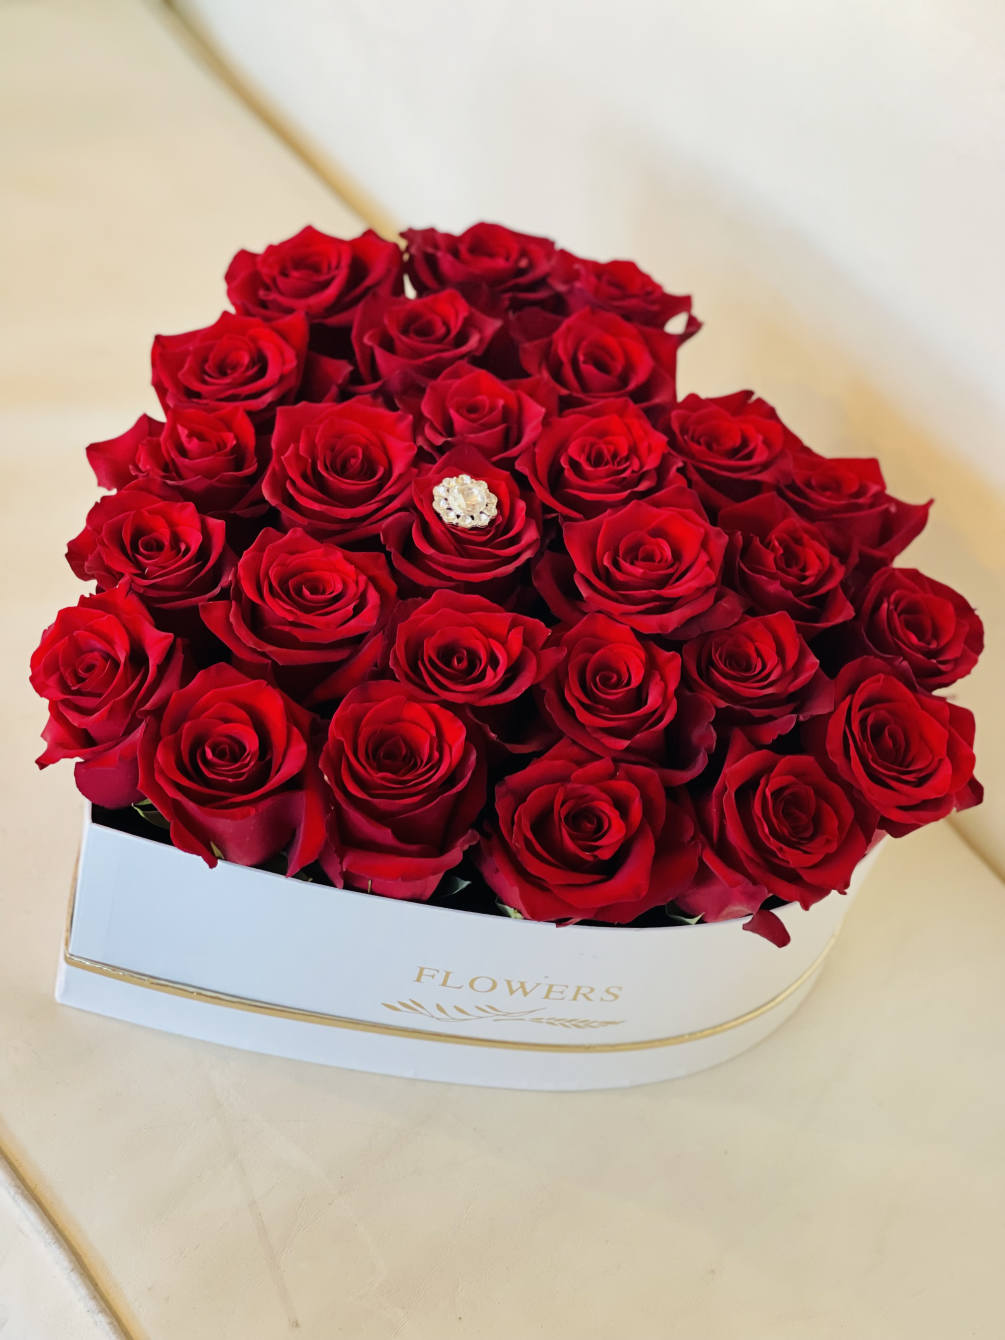 Our Heart box features red roses in a classy white box! There&rsquo;s